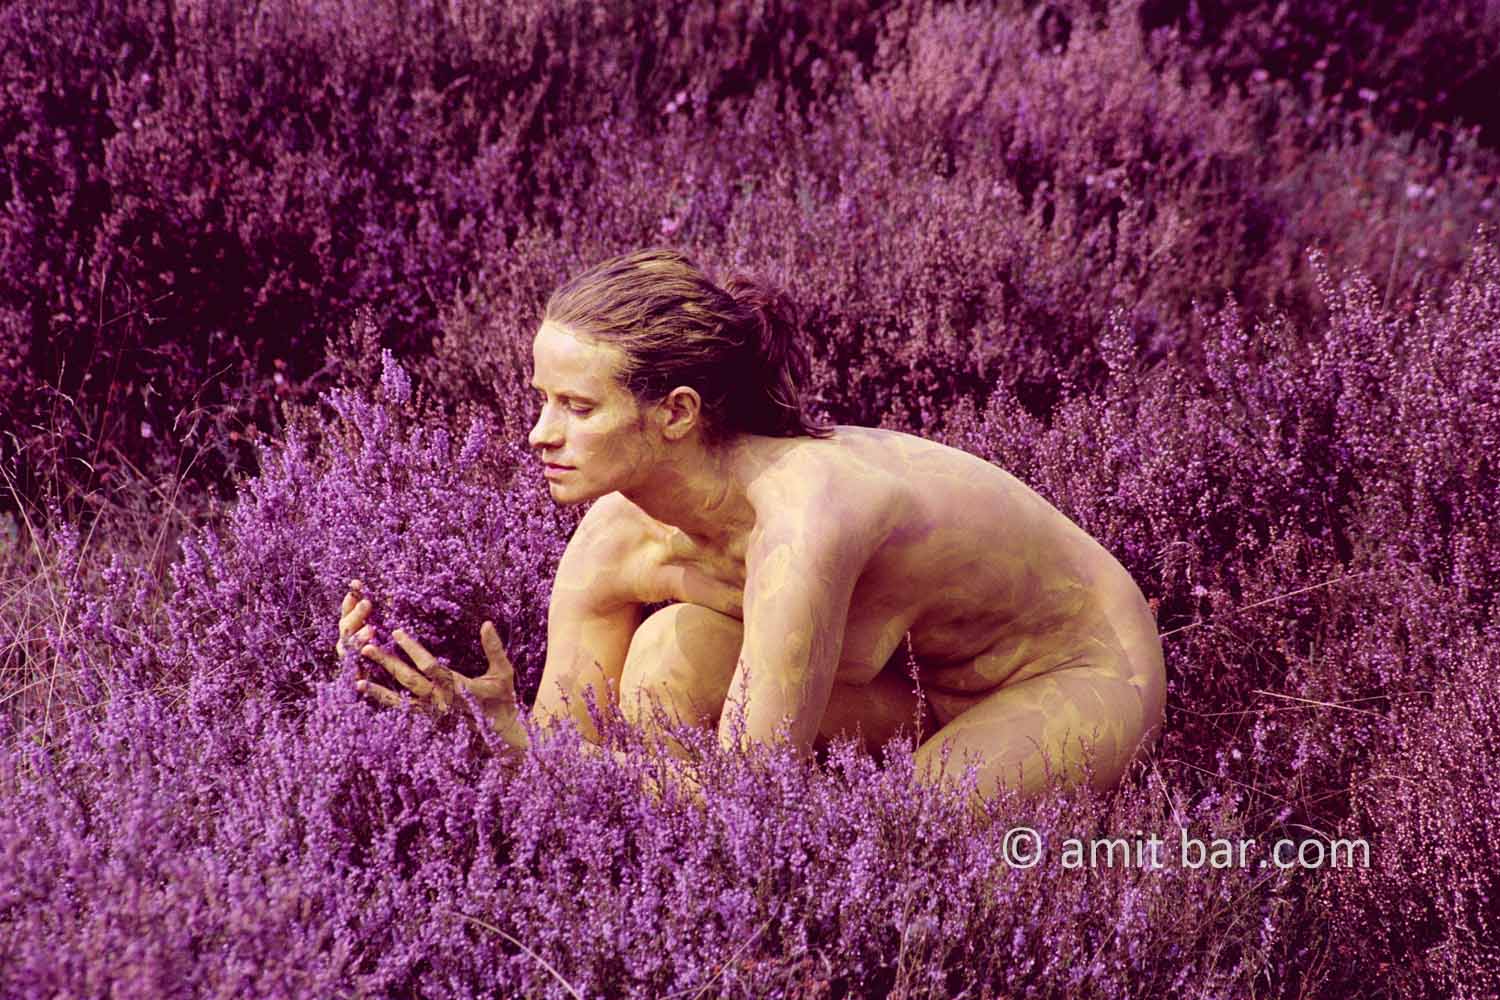 Calluna vulgaris II: Body-painted model with common heather flowers in the nature